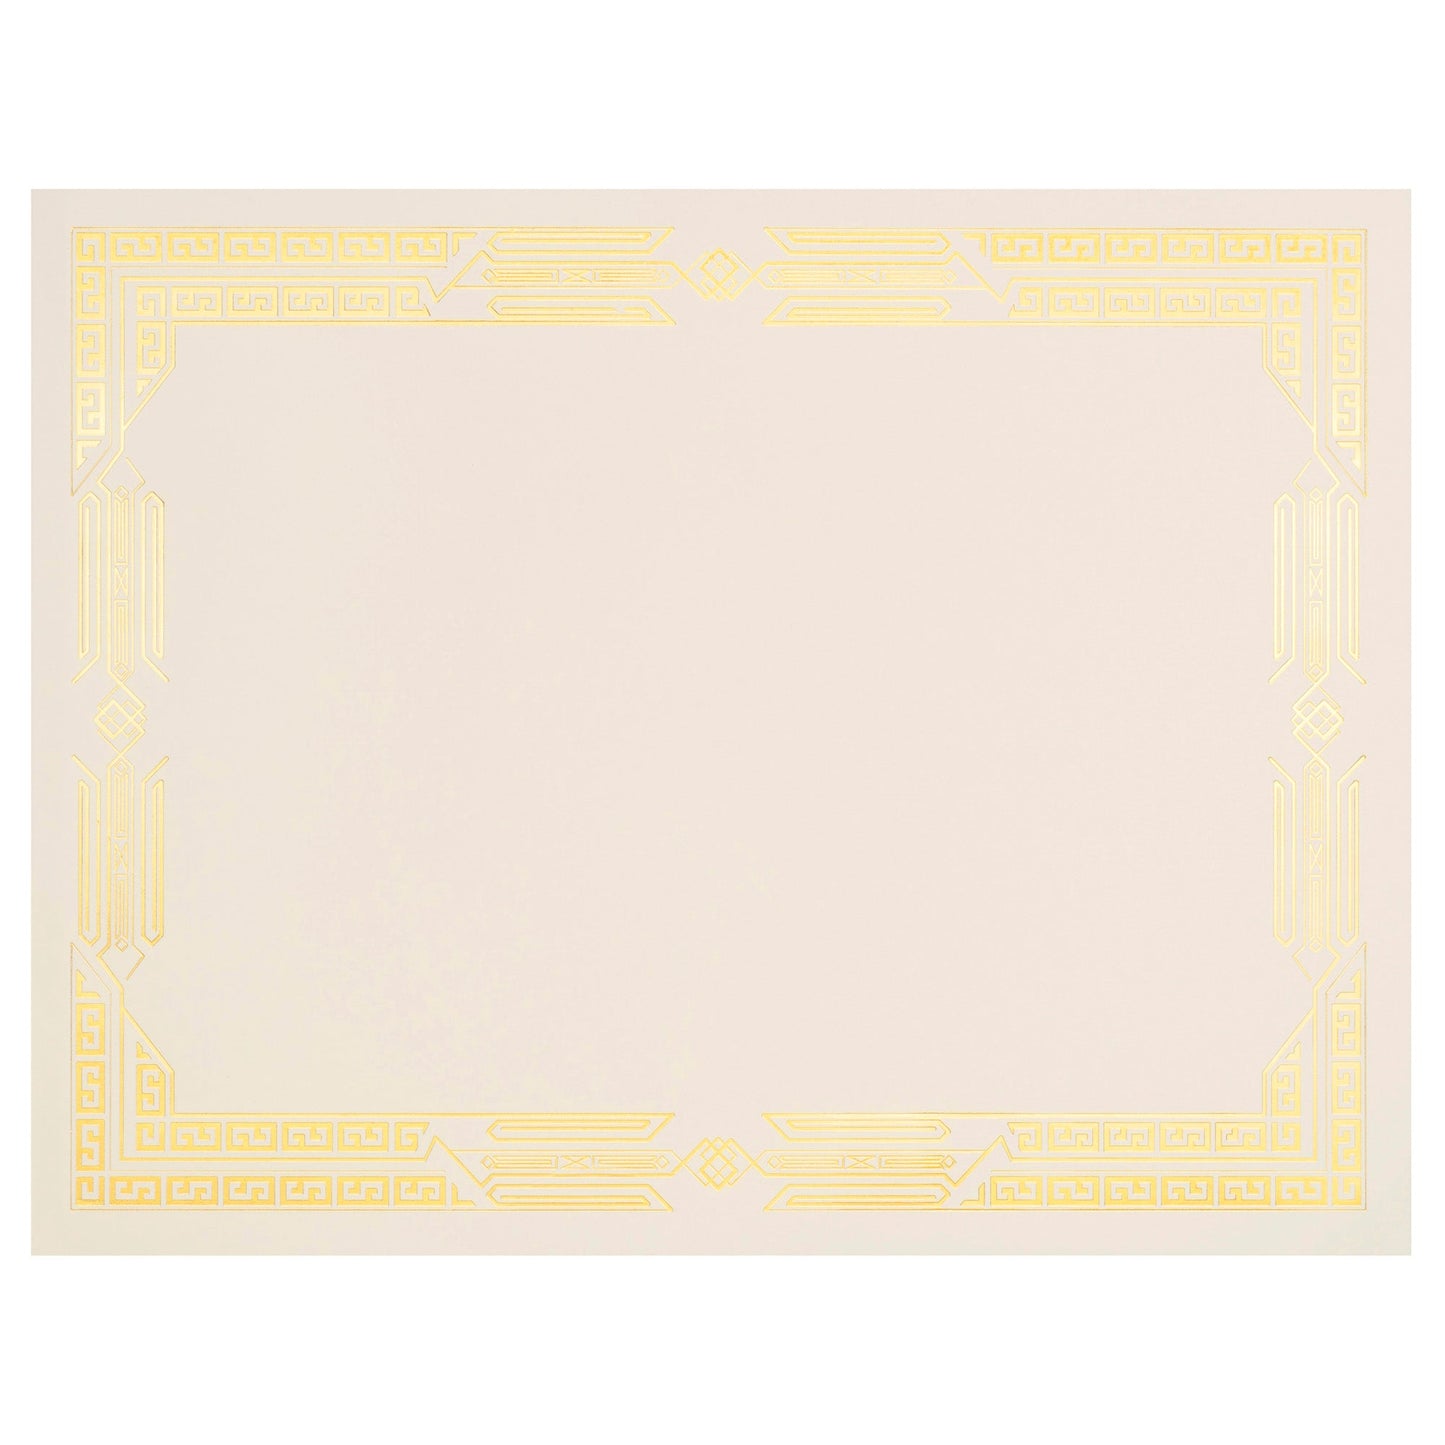 St. James® Premium Weight Certificates, Jazz Design, Gold Foil, Ivory, 65 lb, 8.5 x 11", Pack of 15